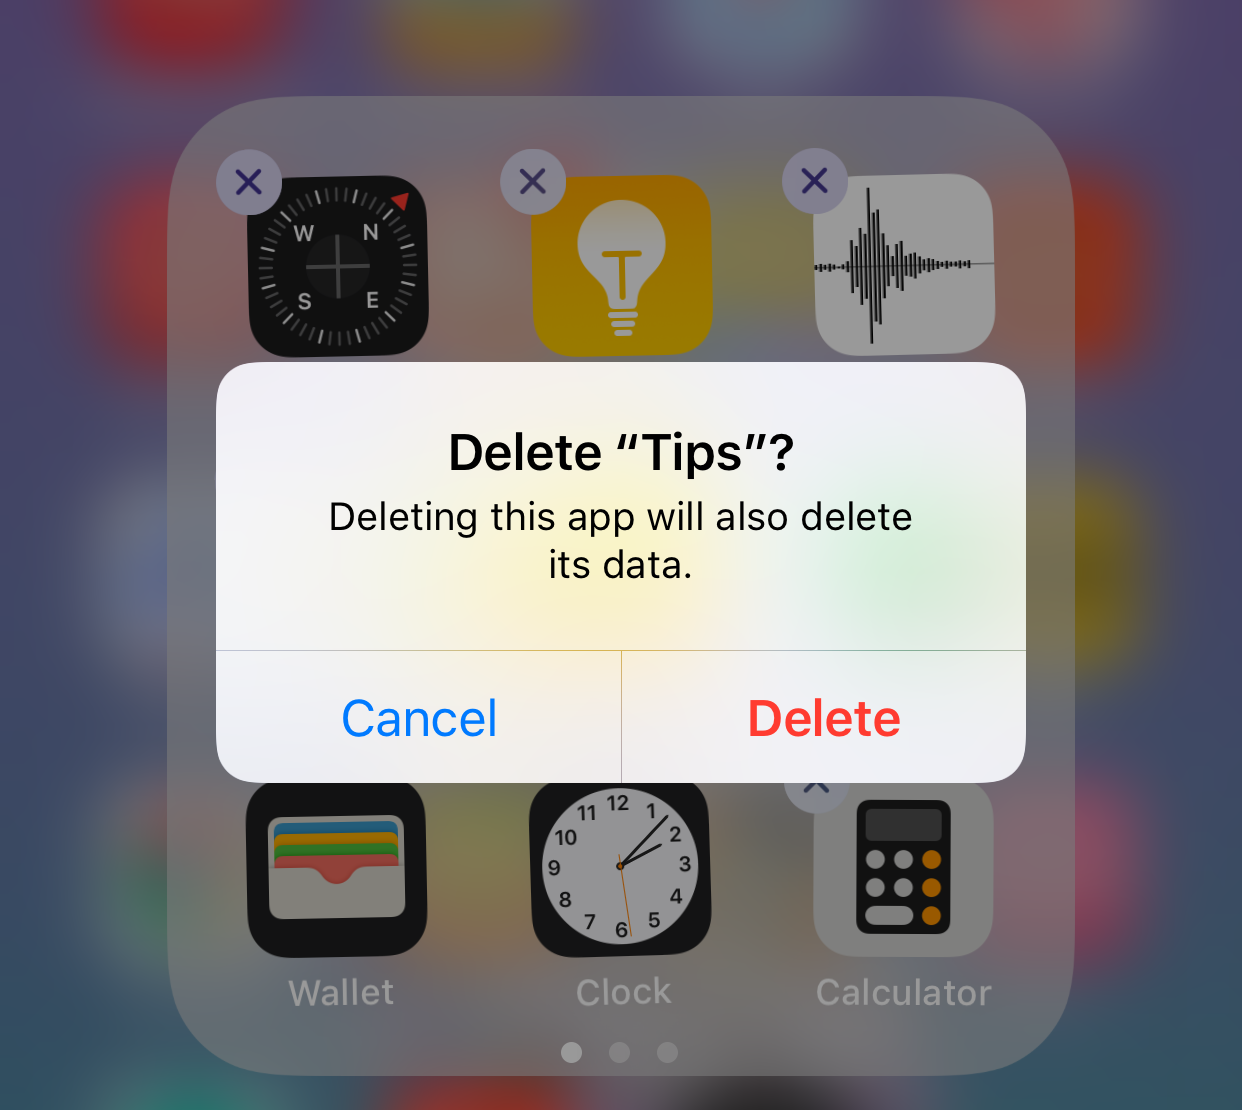 How to Delete Apps on iPhone/iPad in iOS 11